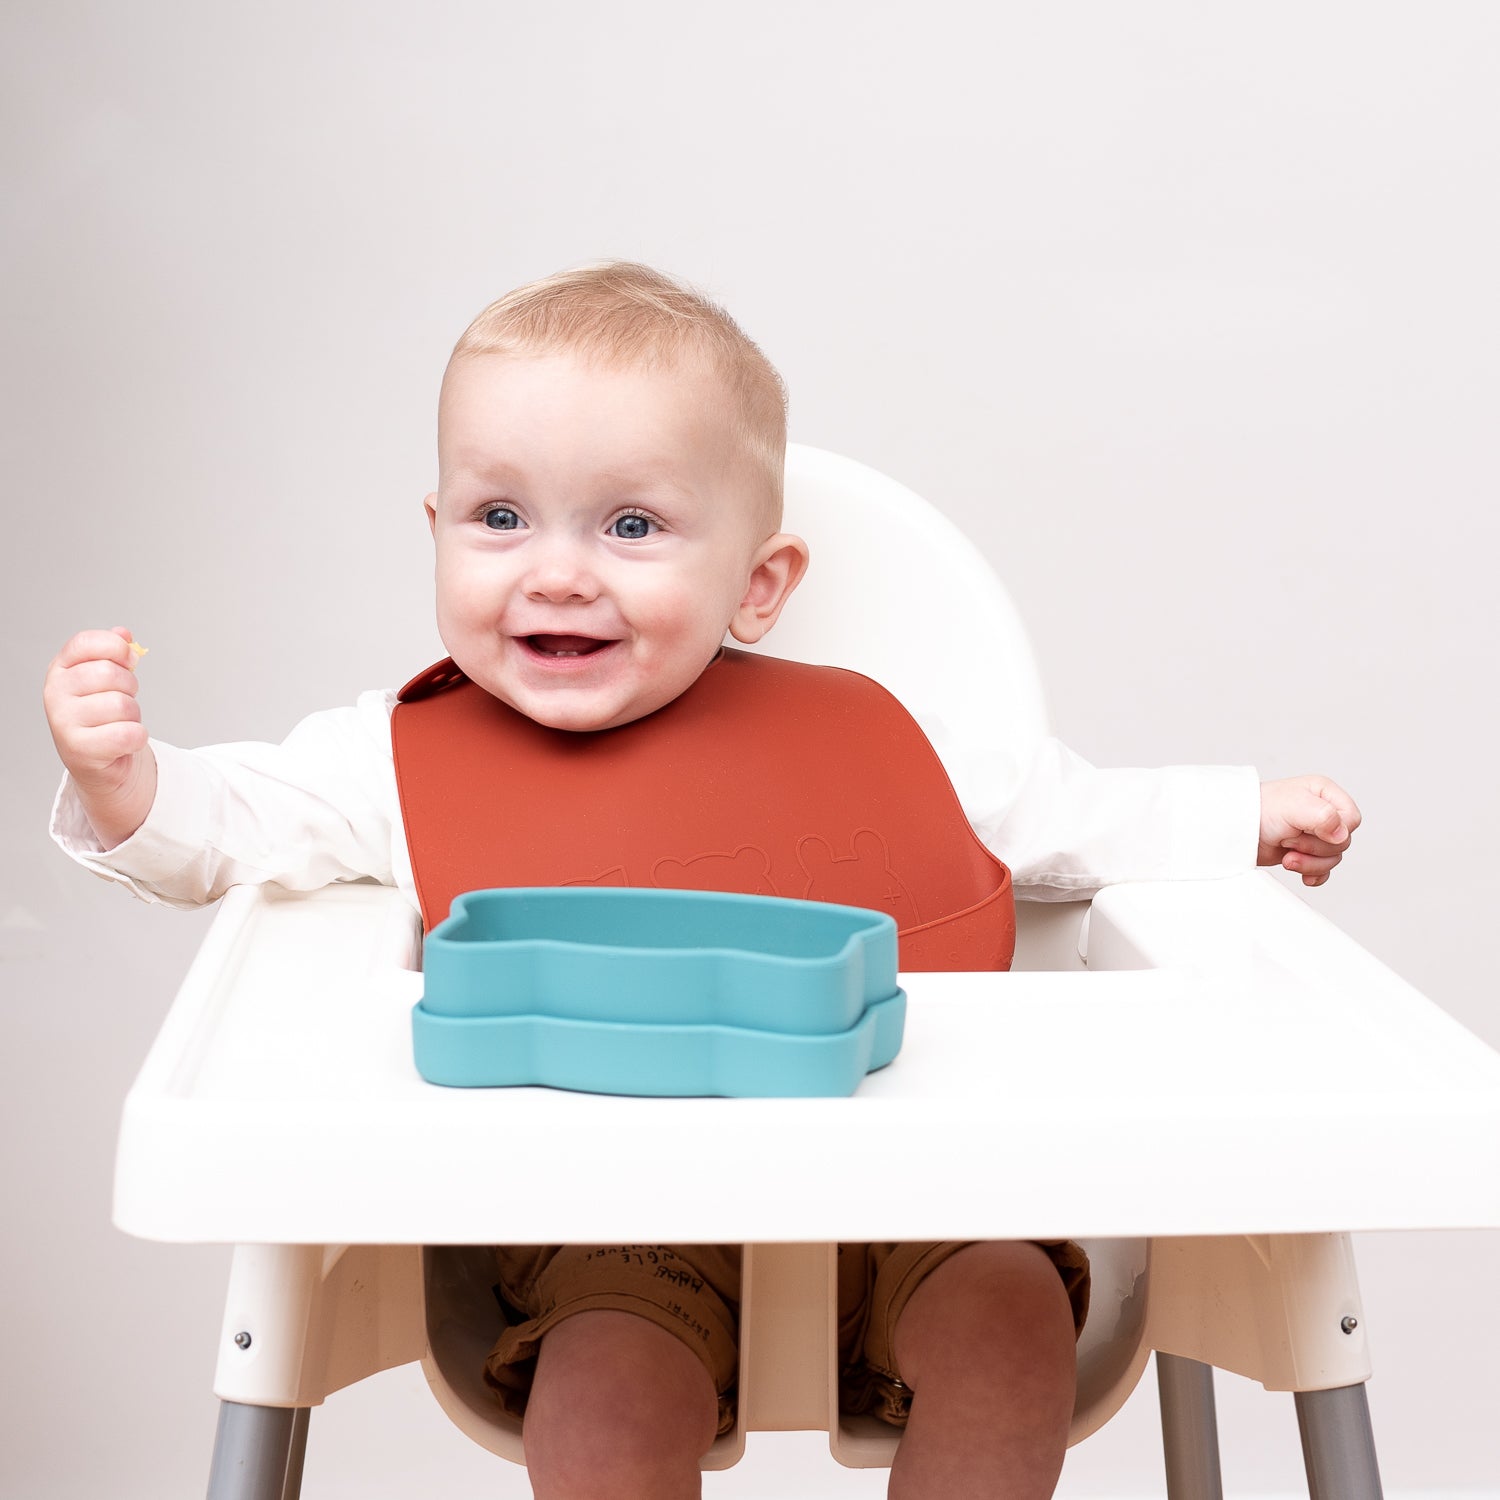 Top 10 baby must-haves for the minimalist family